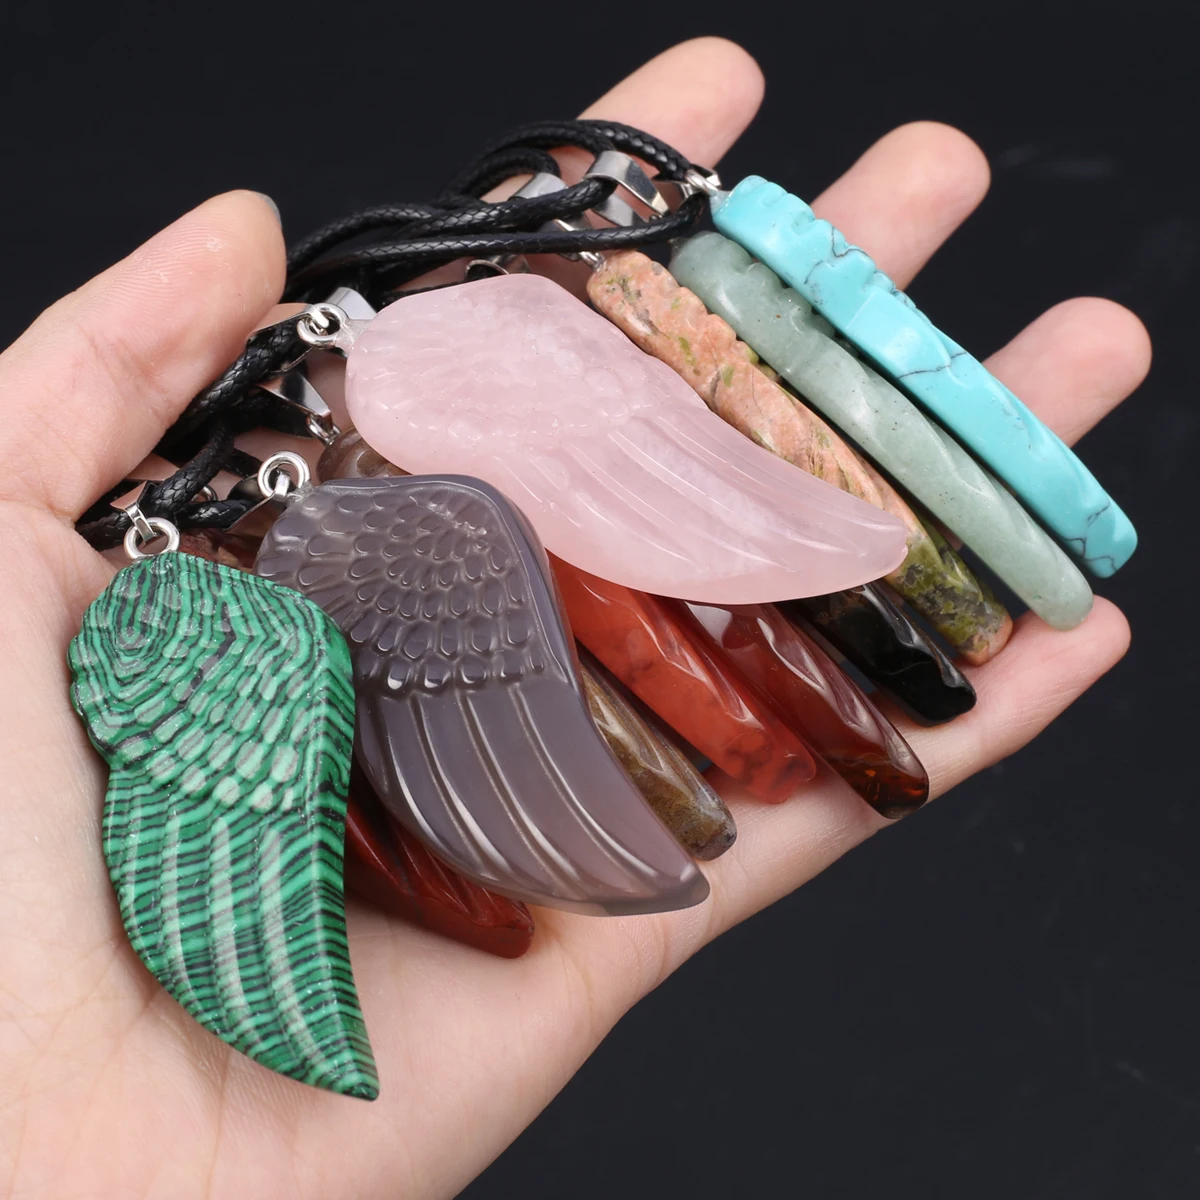 

Natural Semi-precious Bule Turquoise Malachite Angel Wing Shape Pendant Rope Chain Necklace Lovers Jewelry Charm Gift 56X24mm